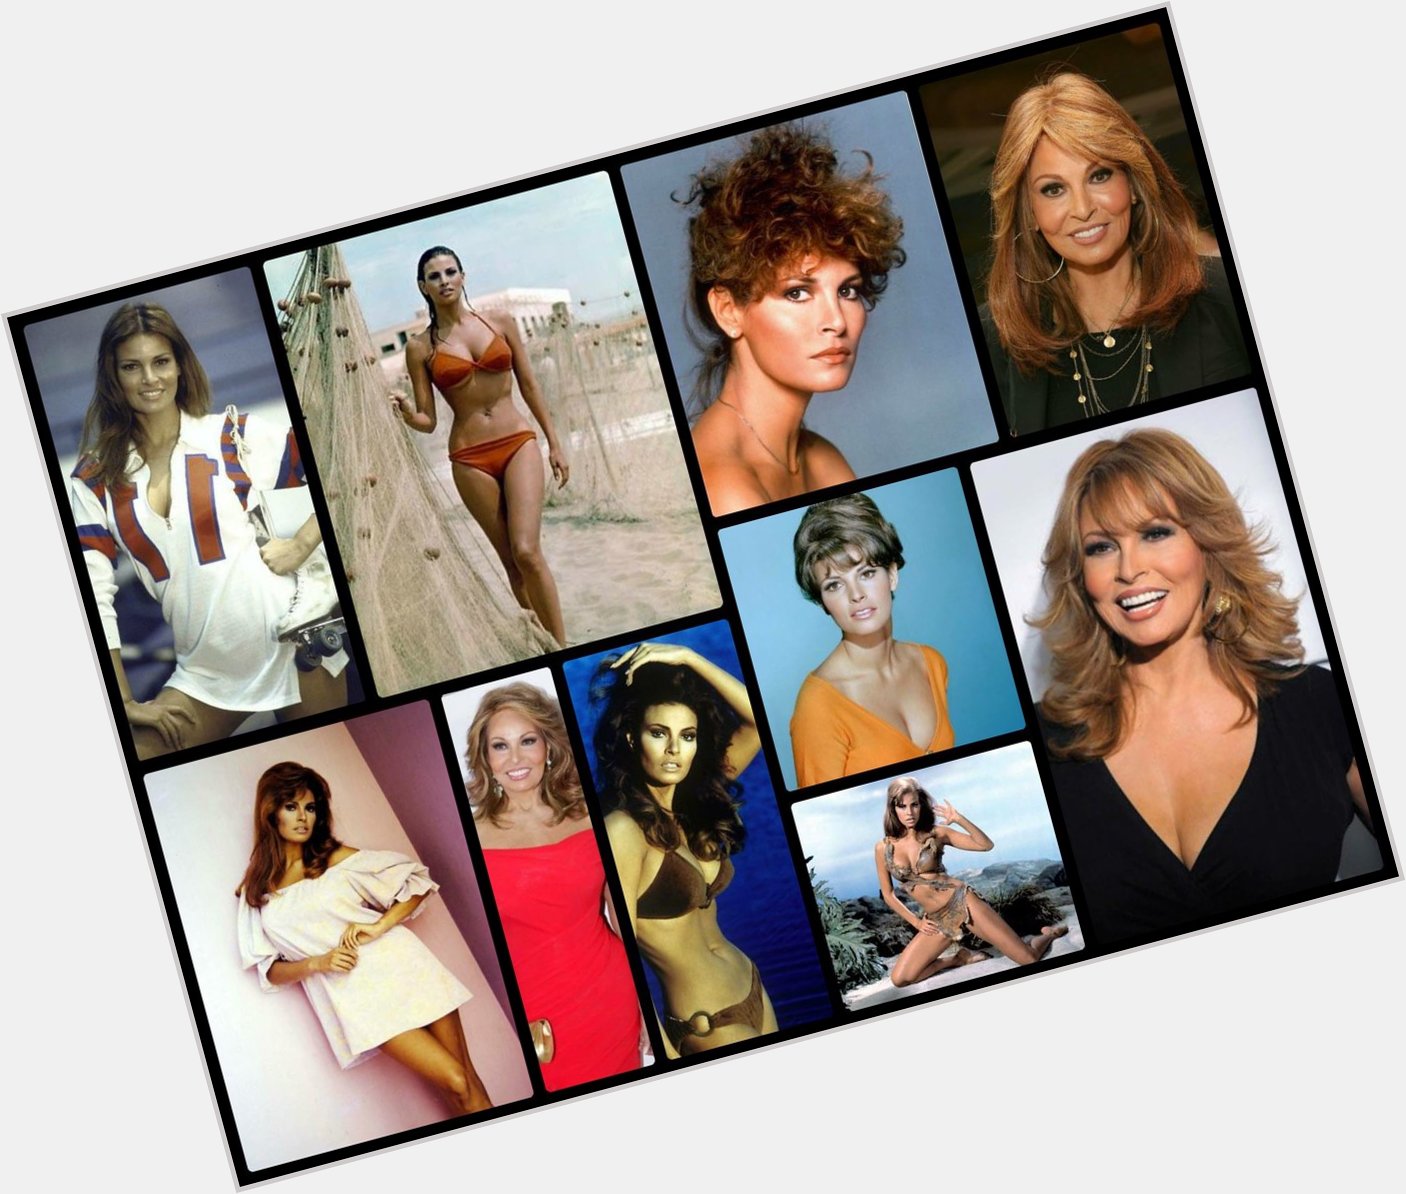 Today in History
September 5th
HAPPY BIRTHDAY
1940 Raquel Welch turns 77 years old today. 